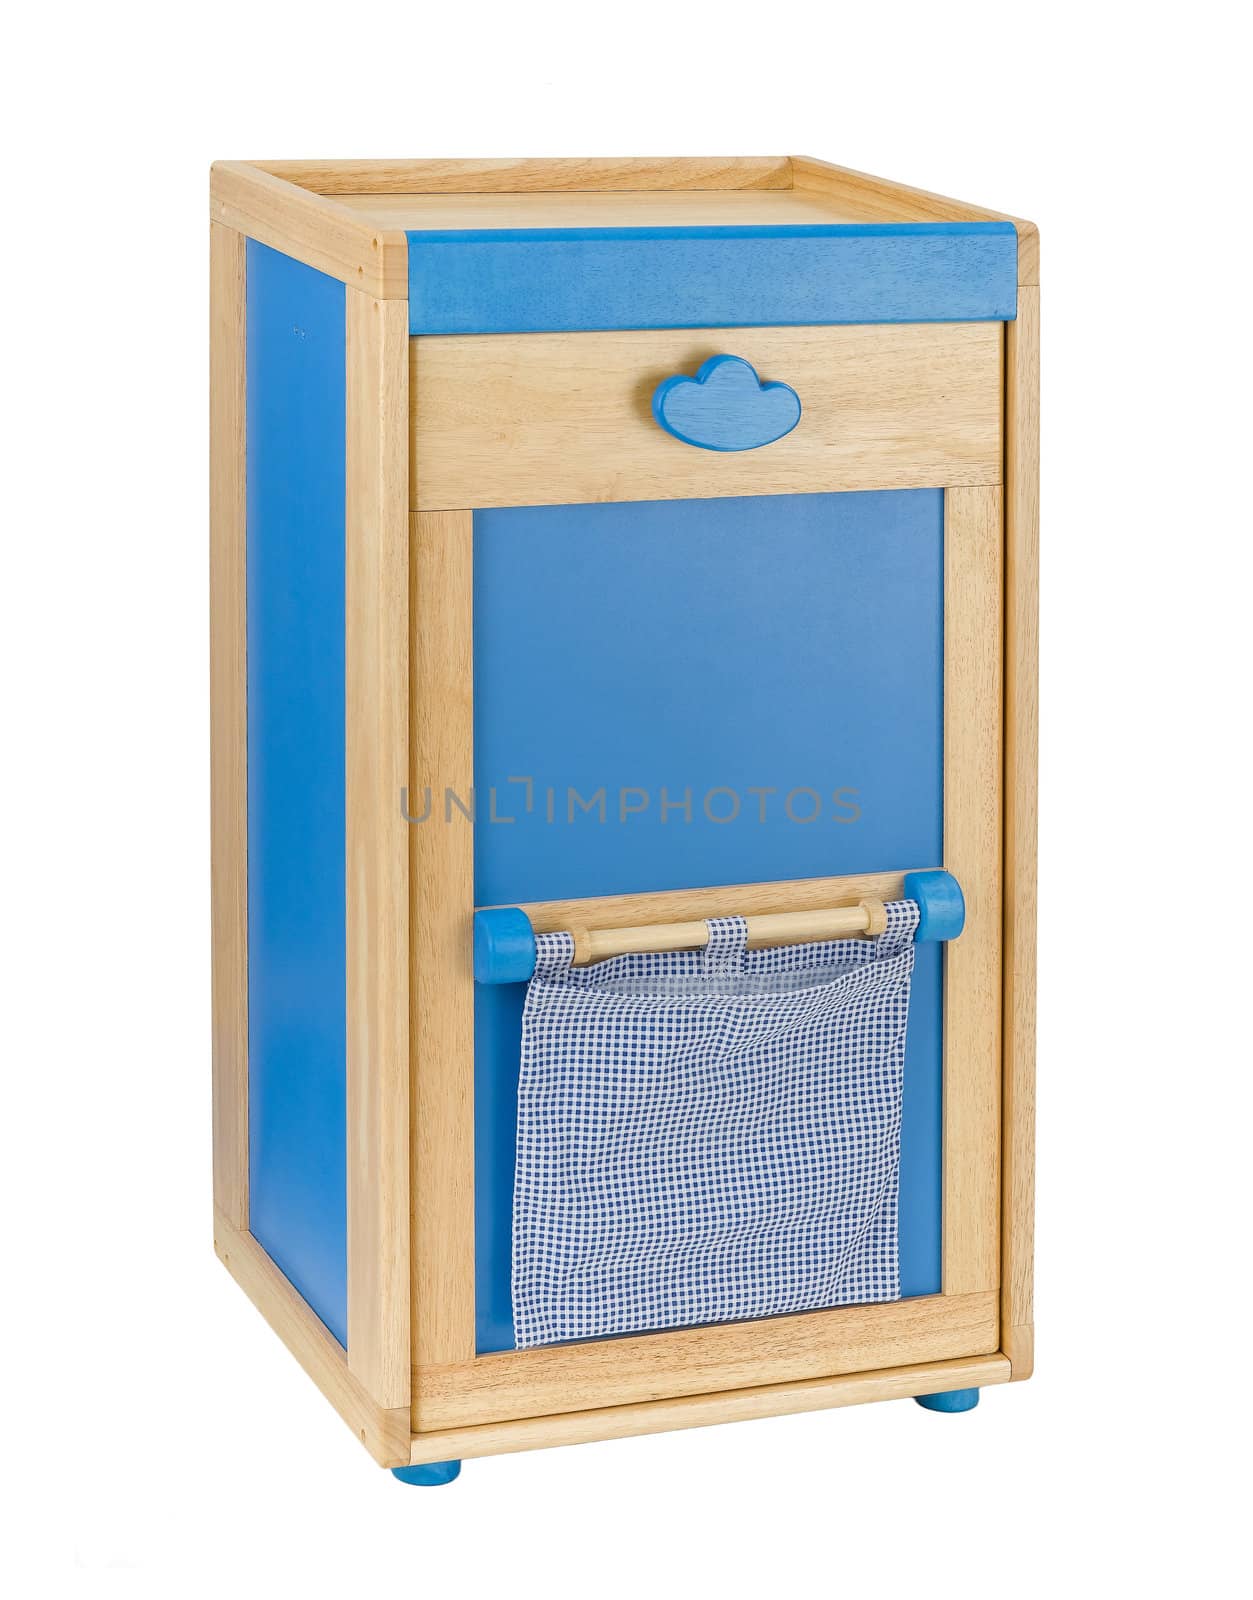 Wooden cabinet for kids to keeping there toys or stuffs by john_kasawa